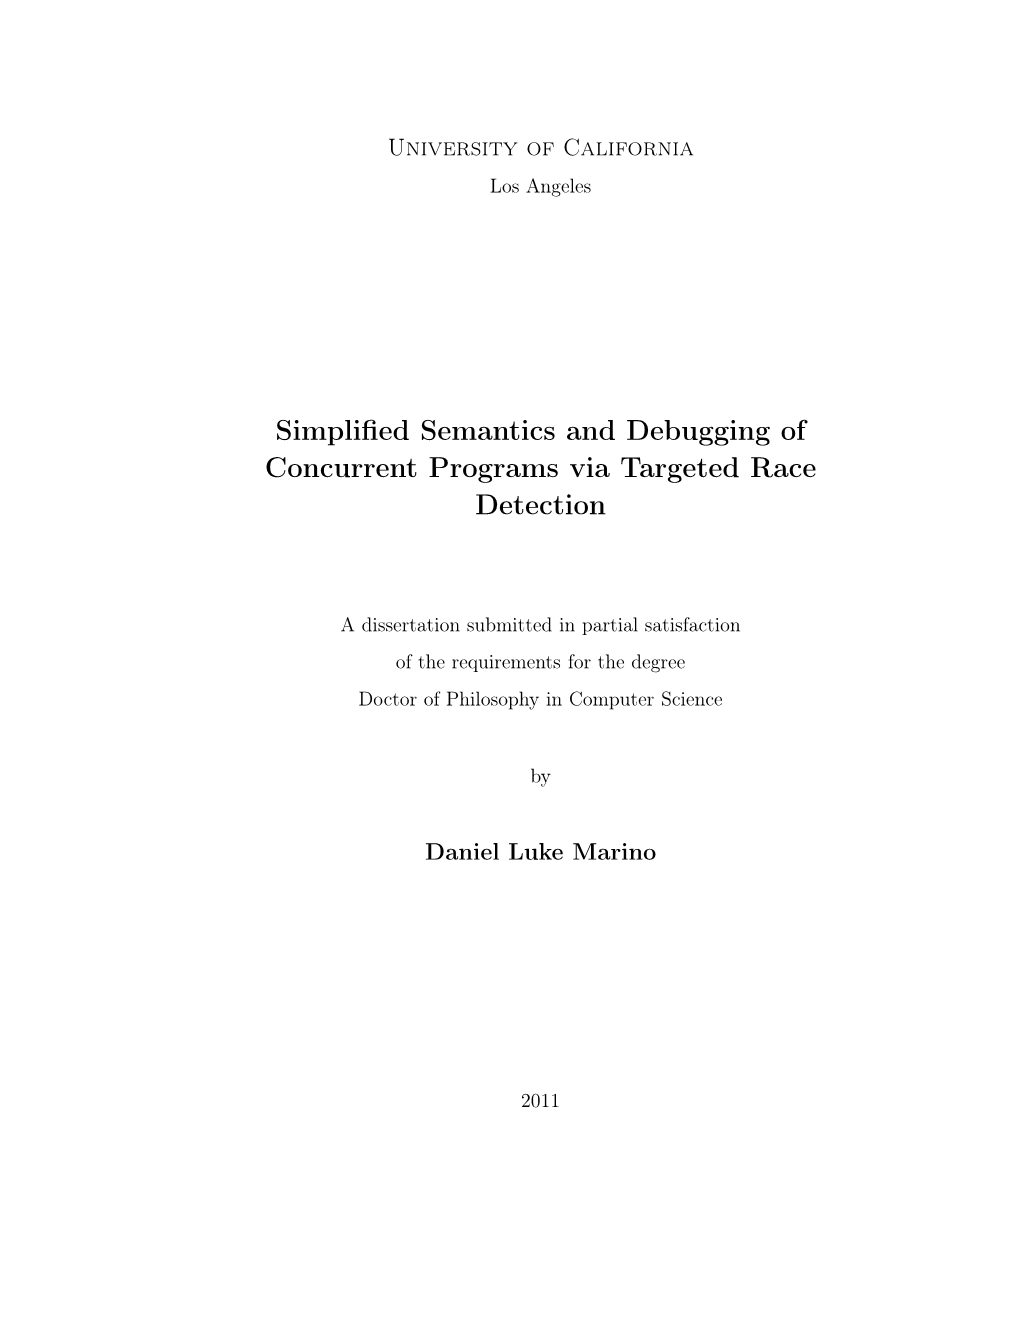 Simplified Semantics and Debugging of Concurrent Programs Via Targeted Race Detection